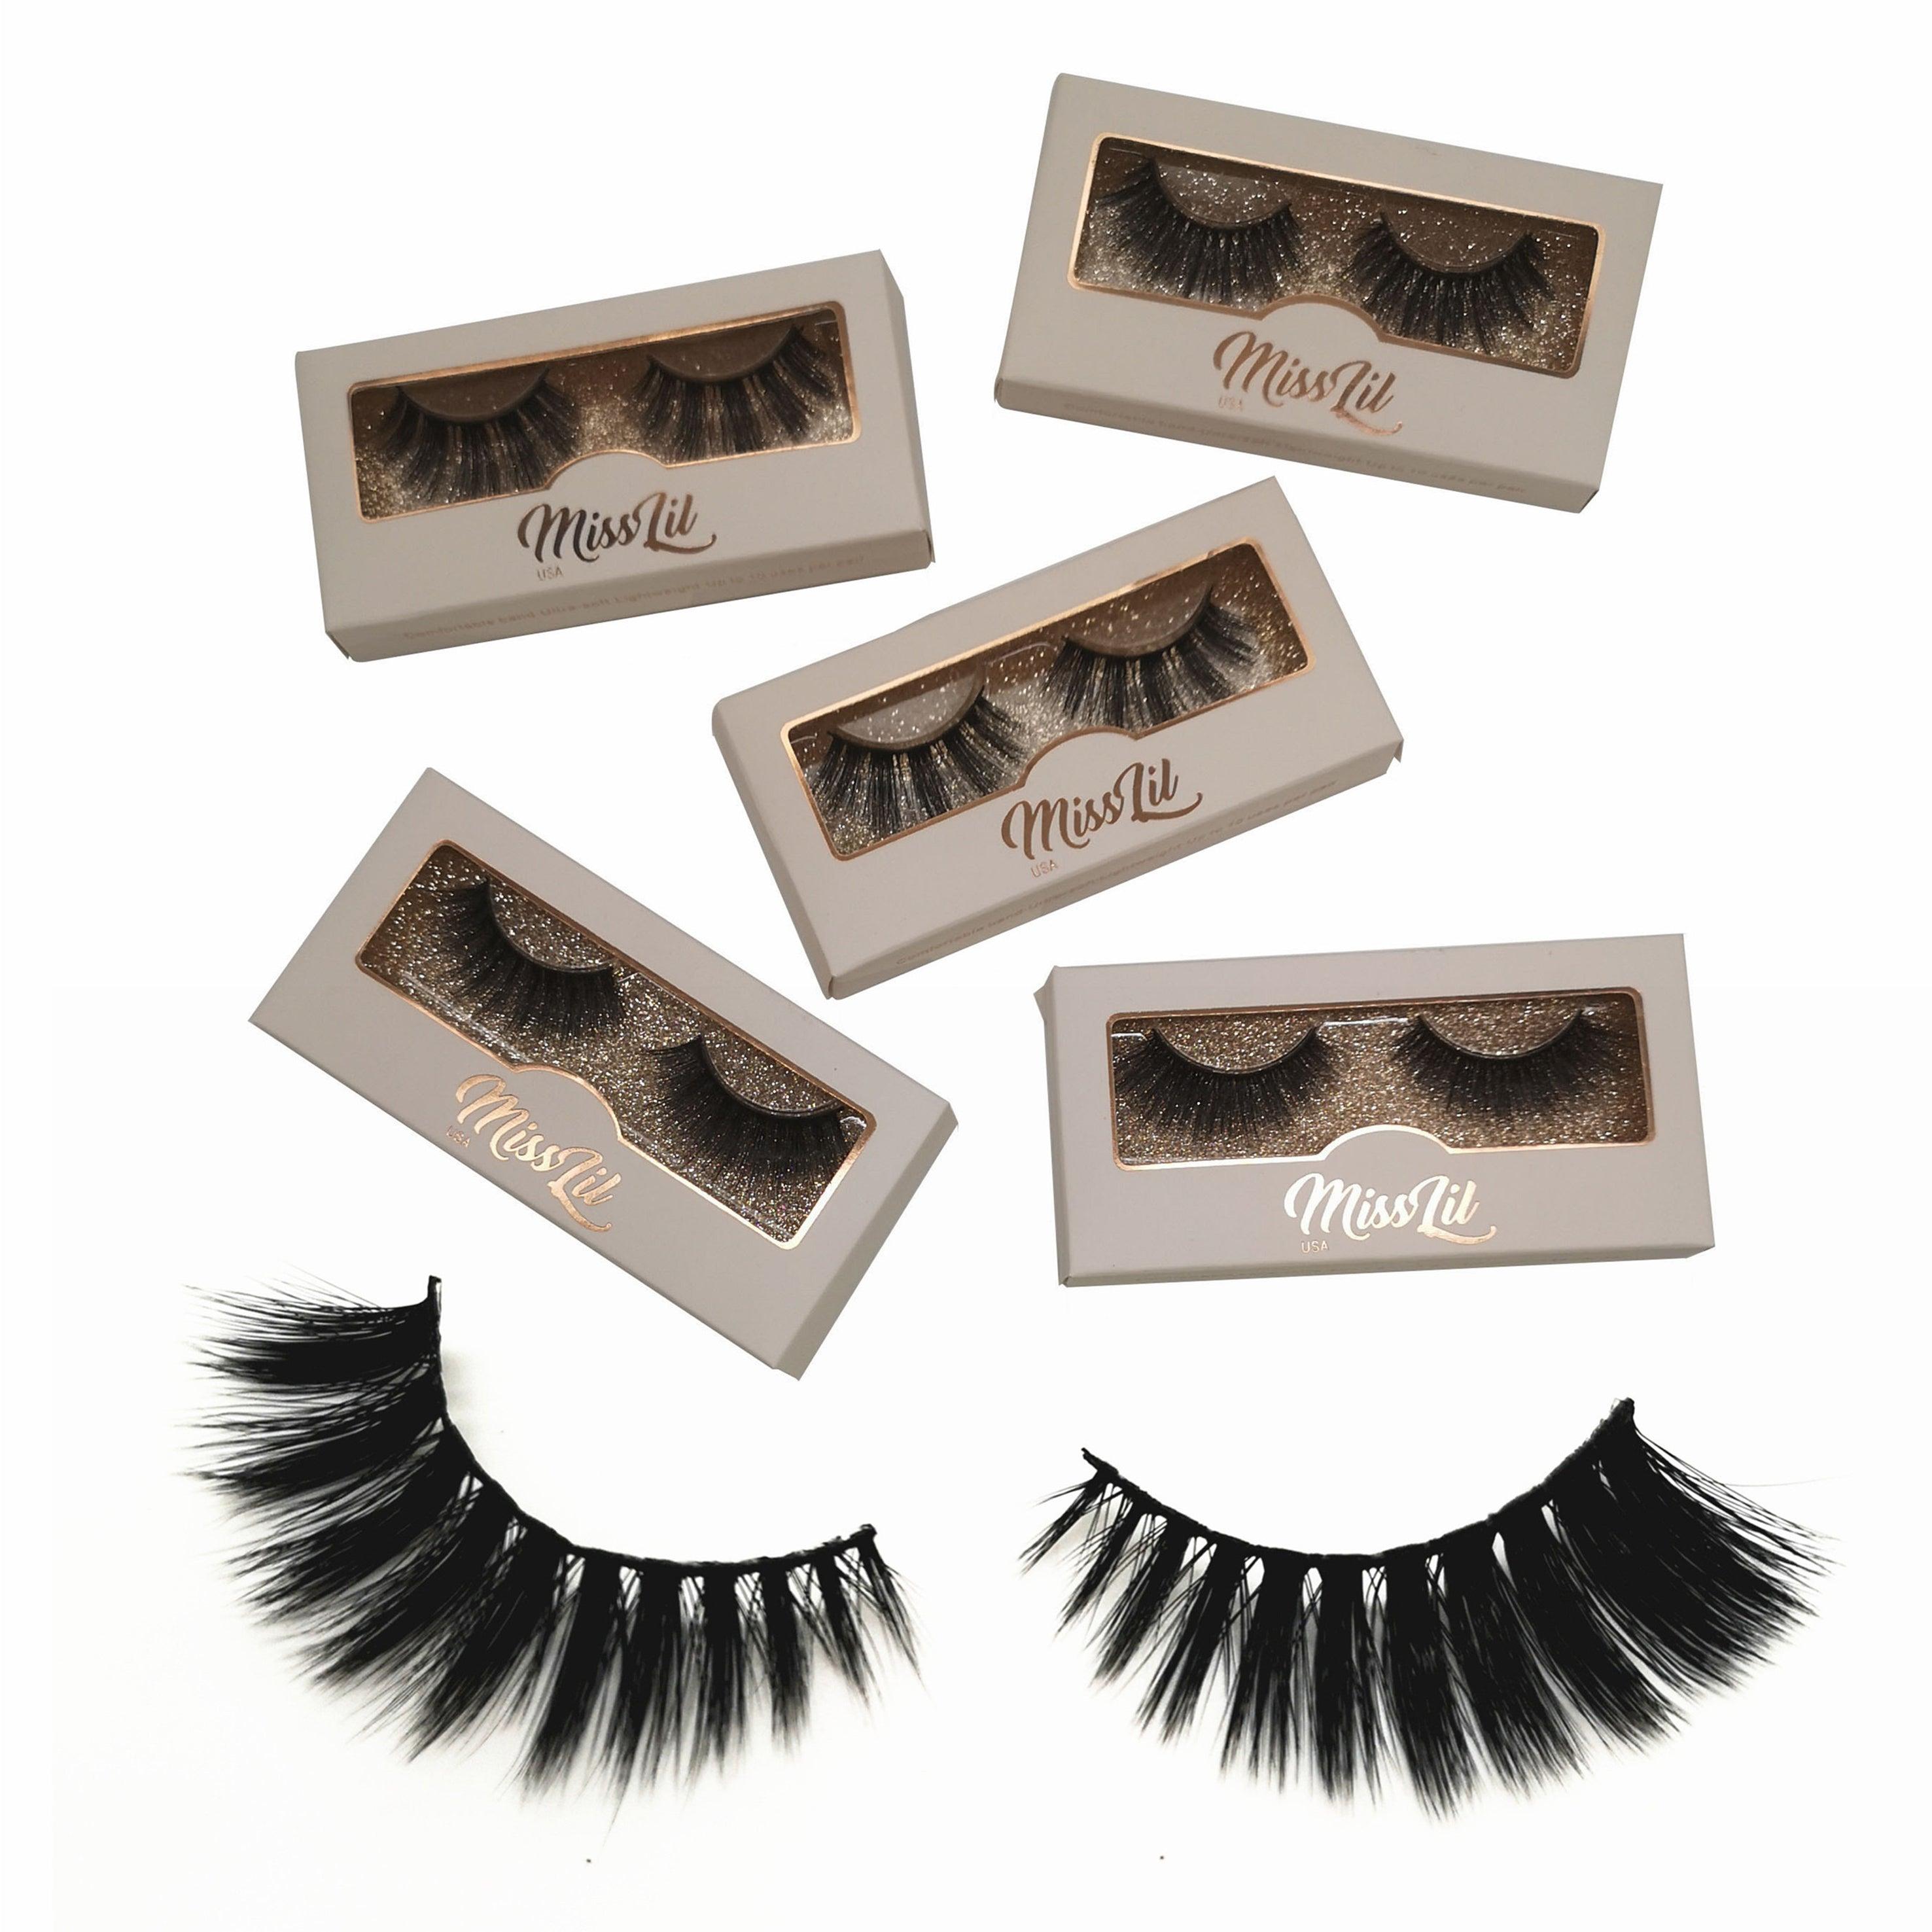 1 Pair Miss Lil USA Lashes #8 (Pack of 12) - Miss Lil USA Wholesale